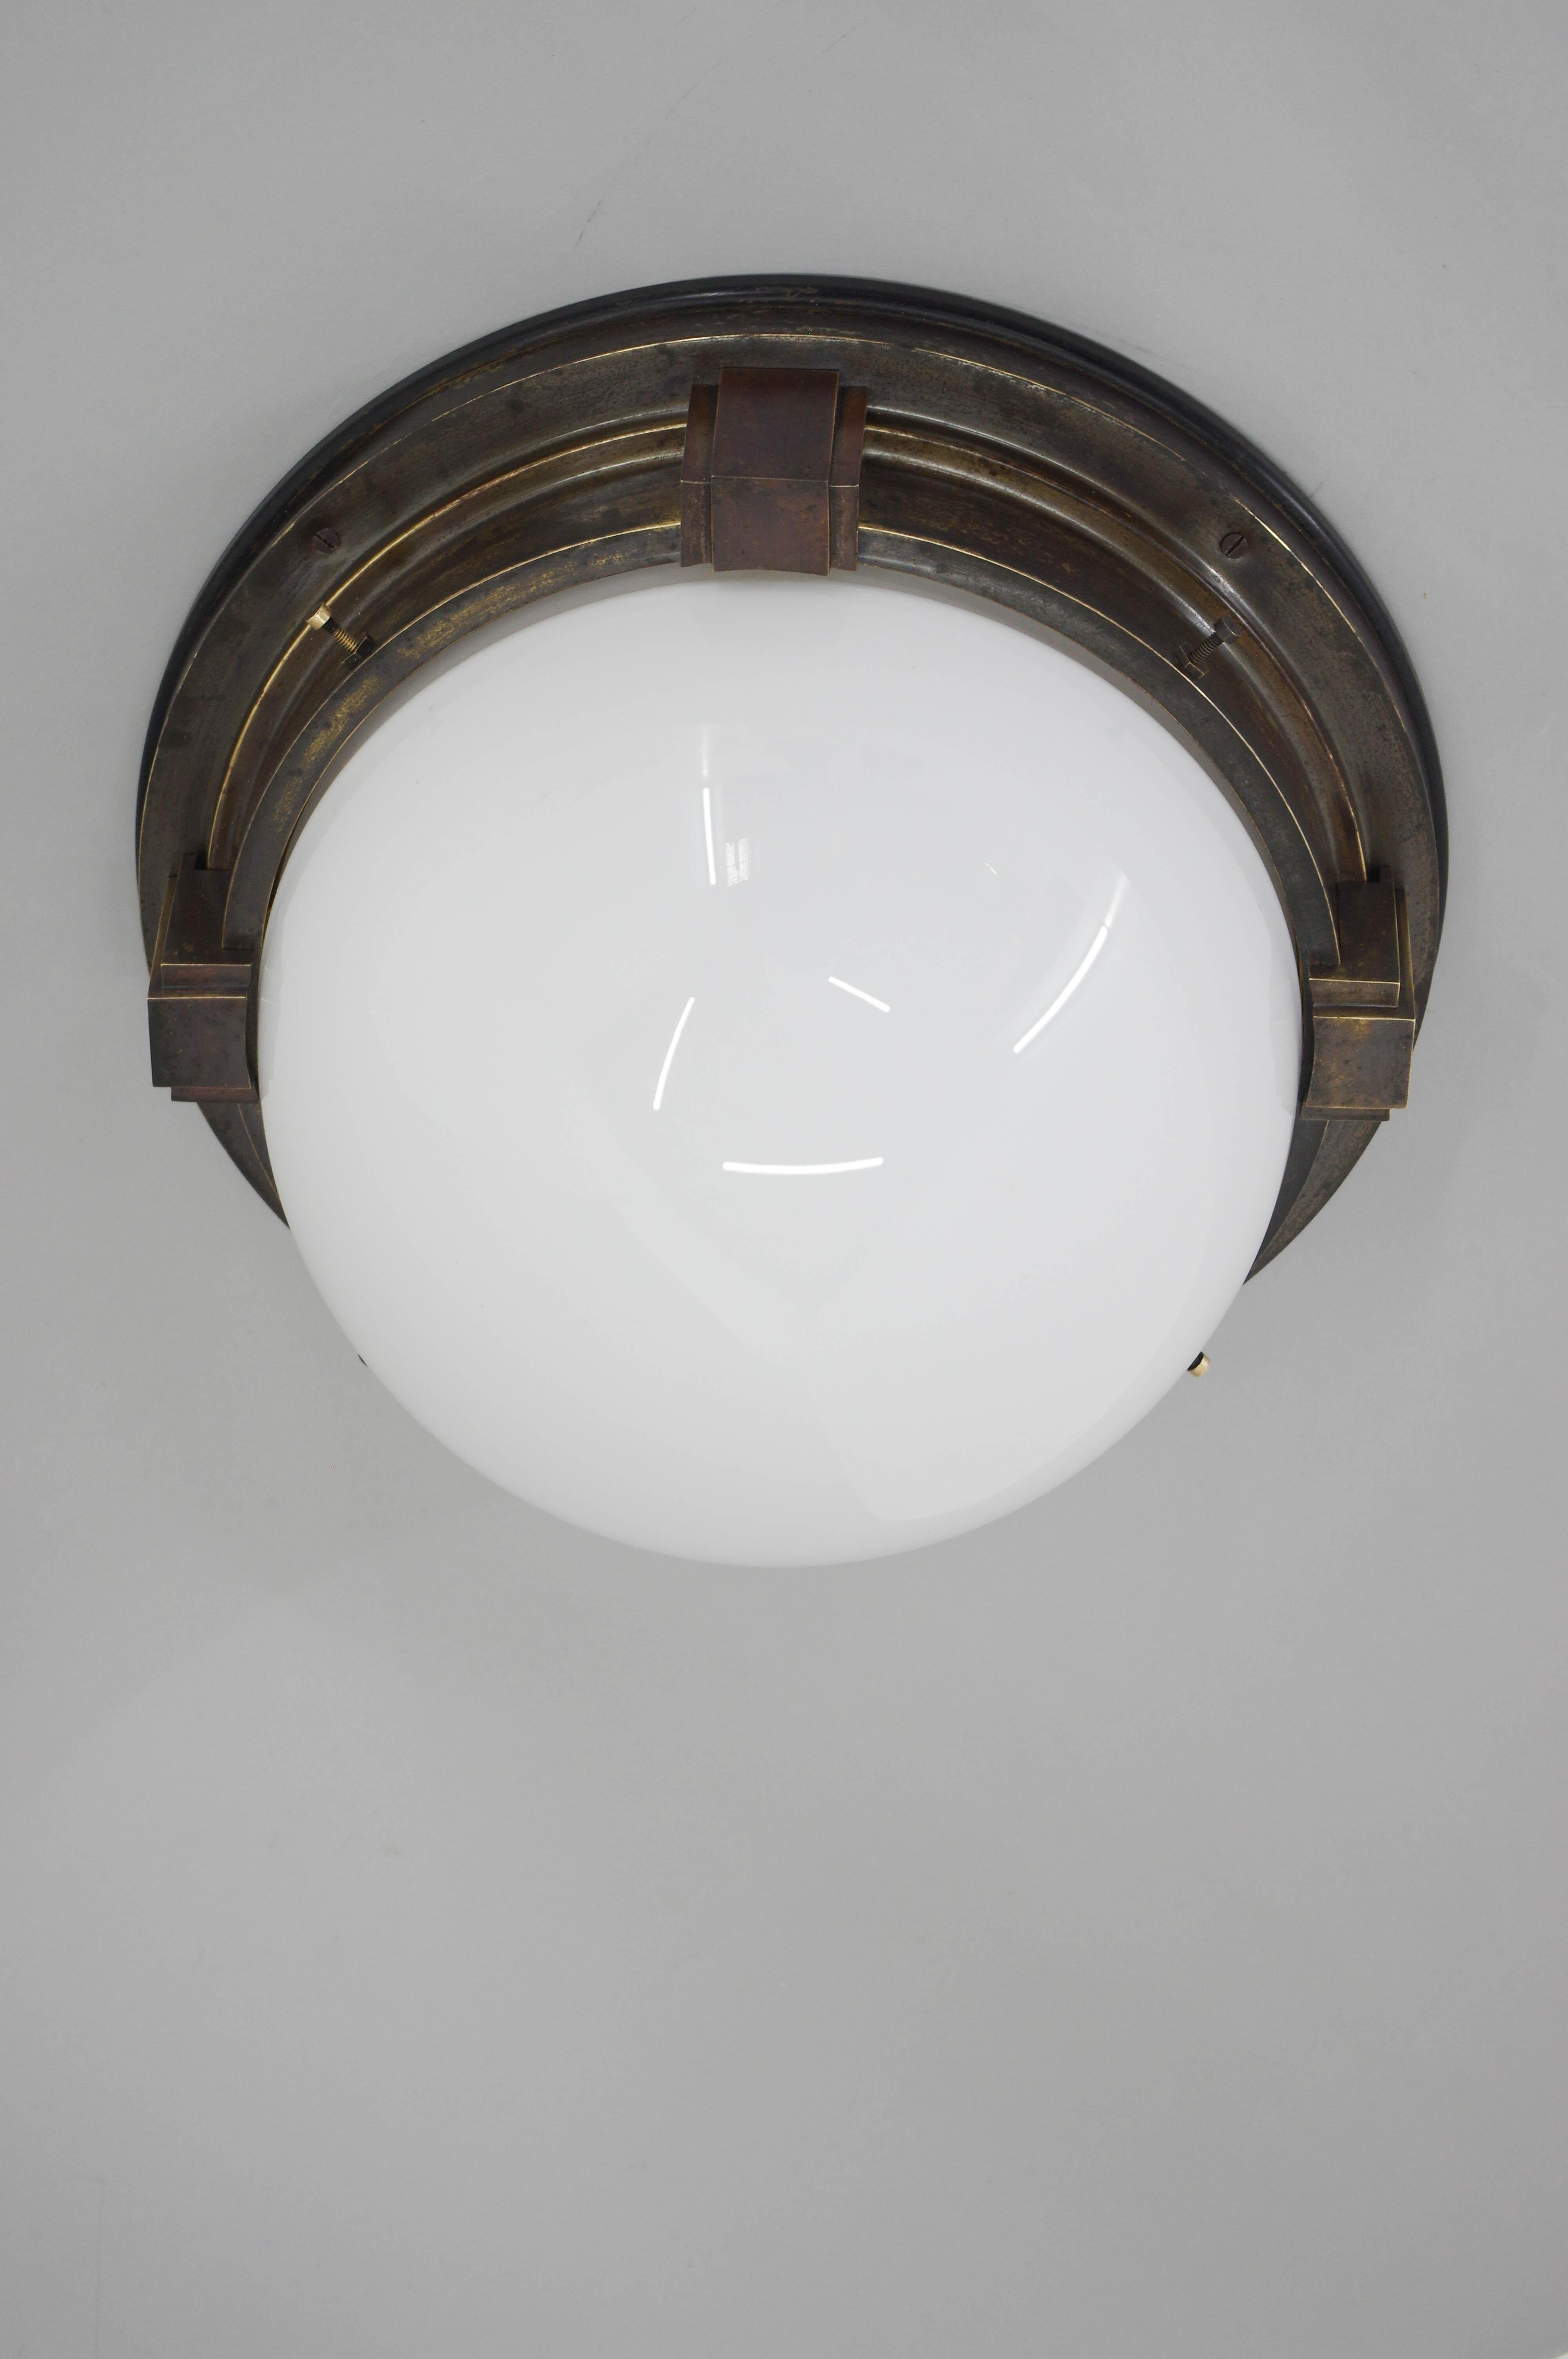 Big Art Deco flush mount made in 1910s.
Wooden and brass base with beautiful patina.
Opaline blown glass shade without any damage.
Cleaned, polished and rewired:
4x60W, E25-E27 bulbs
US wiring compatible